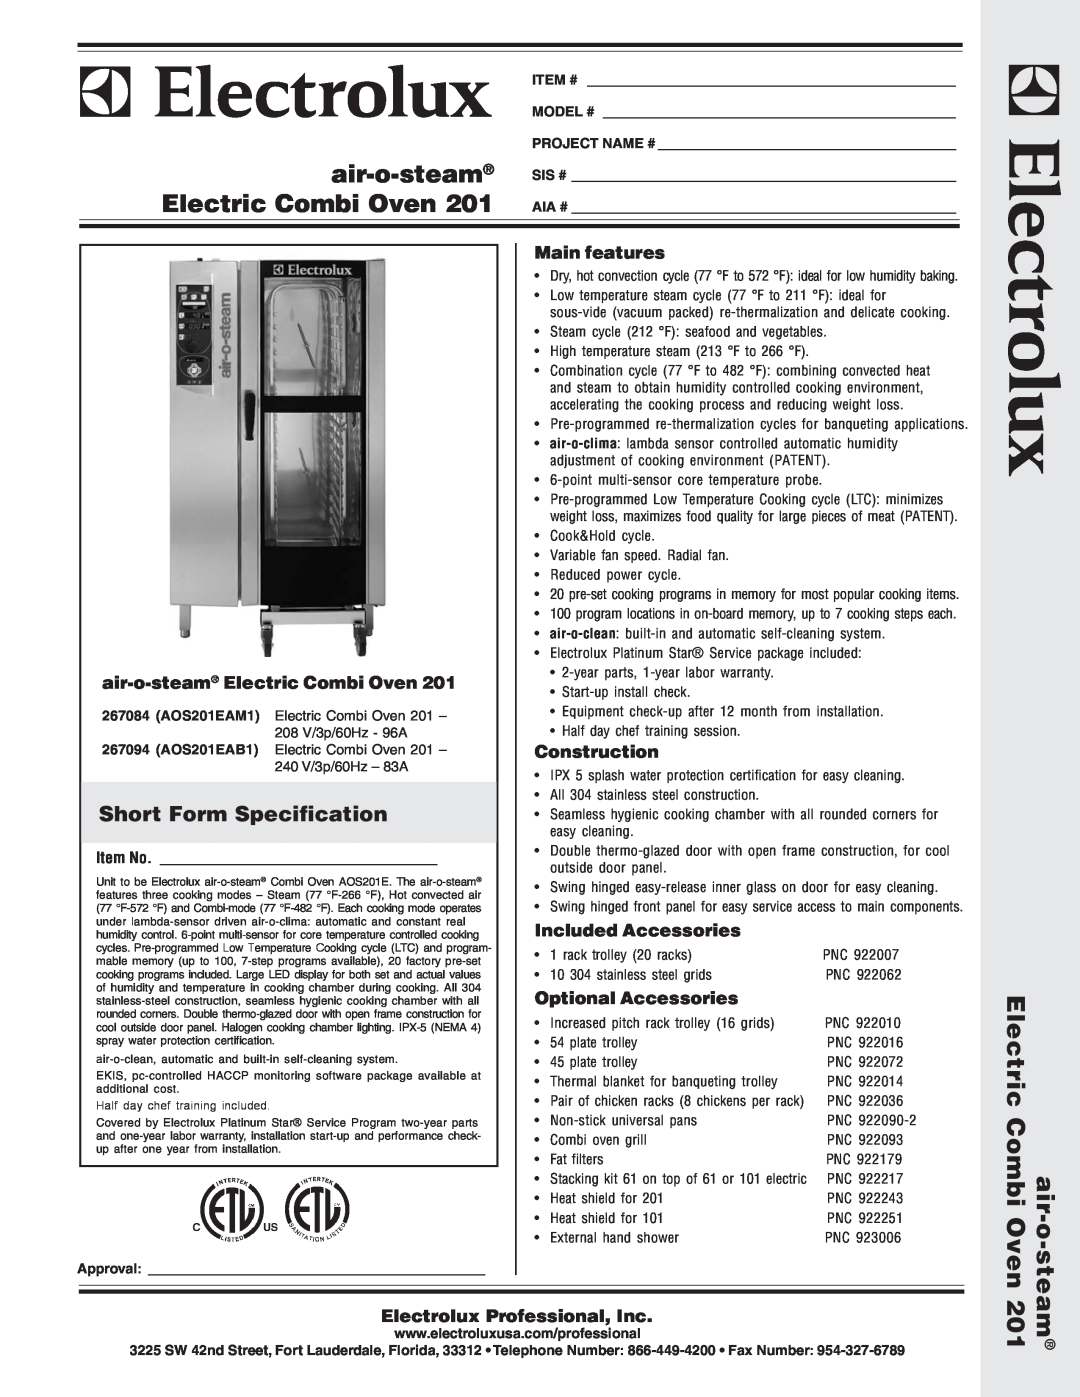 Electrolux AOS201EAB1 warranty Short Form Specification, Main features, air-o-steam Electric Combi Oven, Construction 